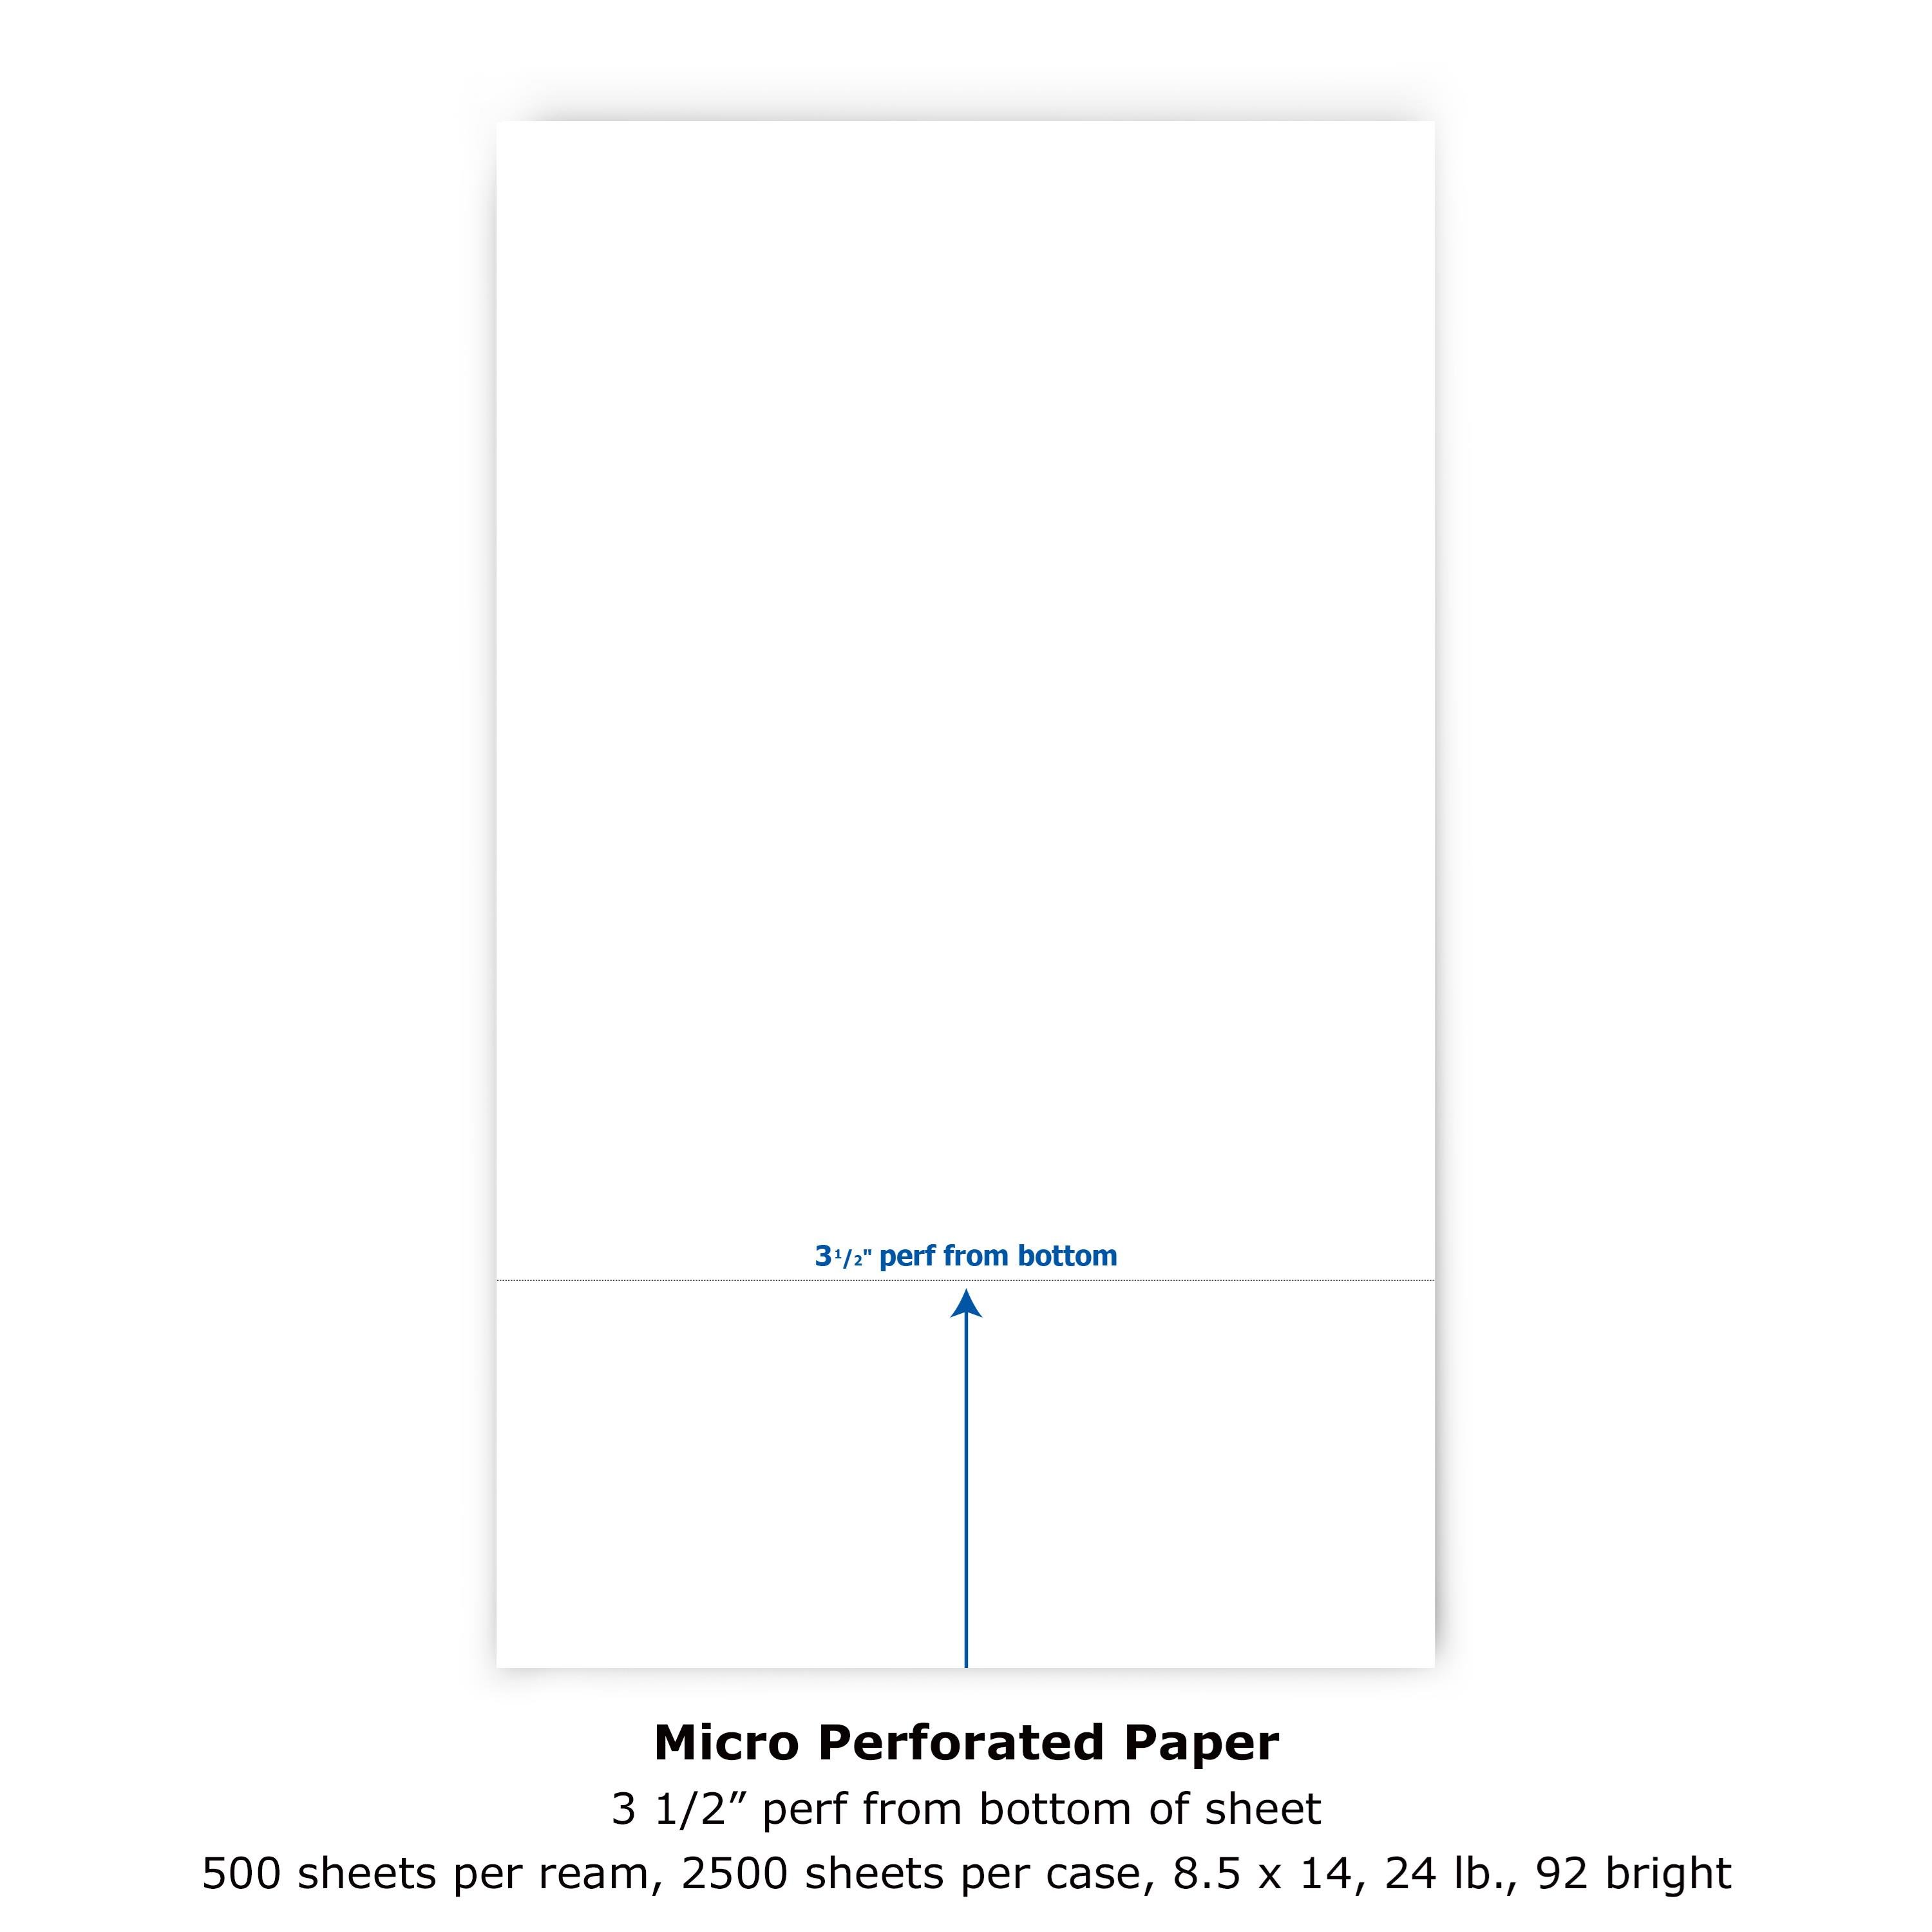 Perforated Paper 81/2" X 11", Perfed 31/2" From Bottom 24